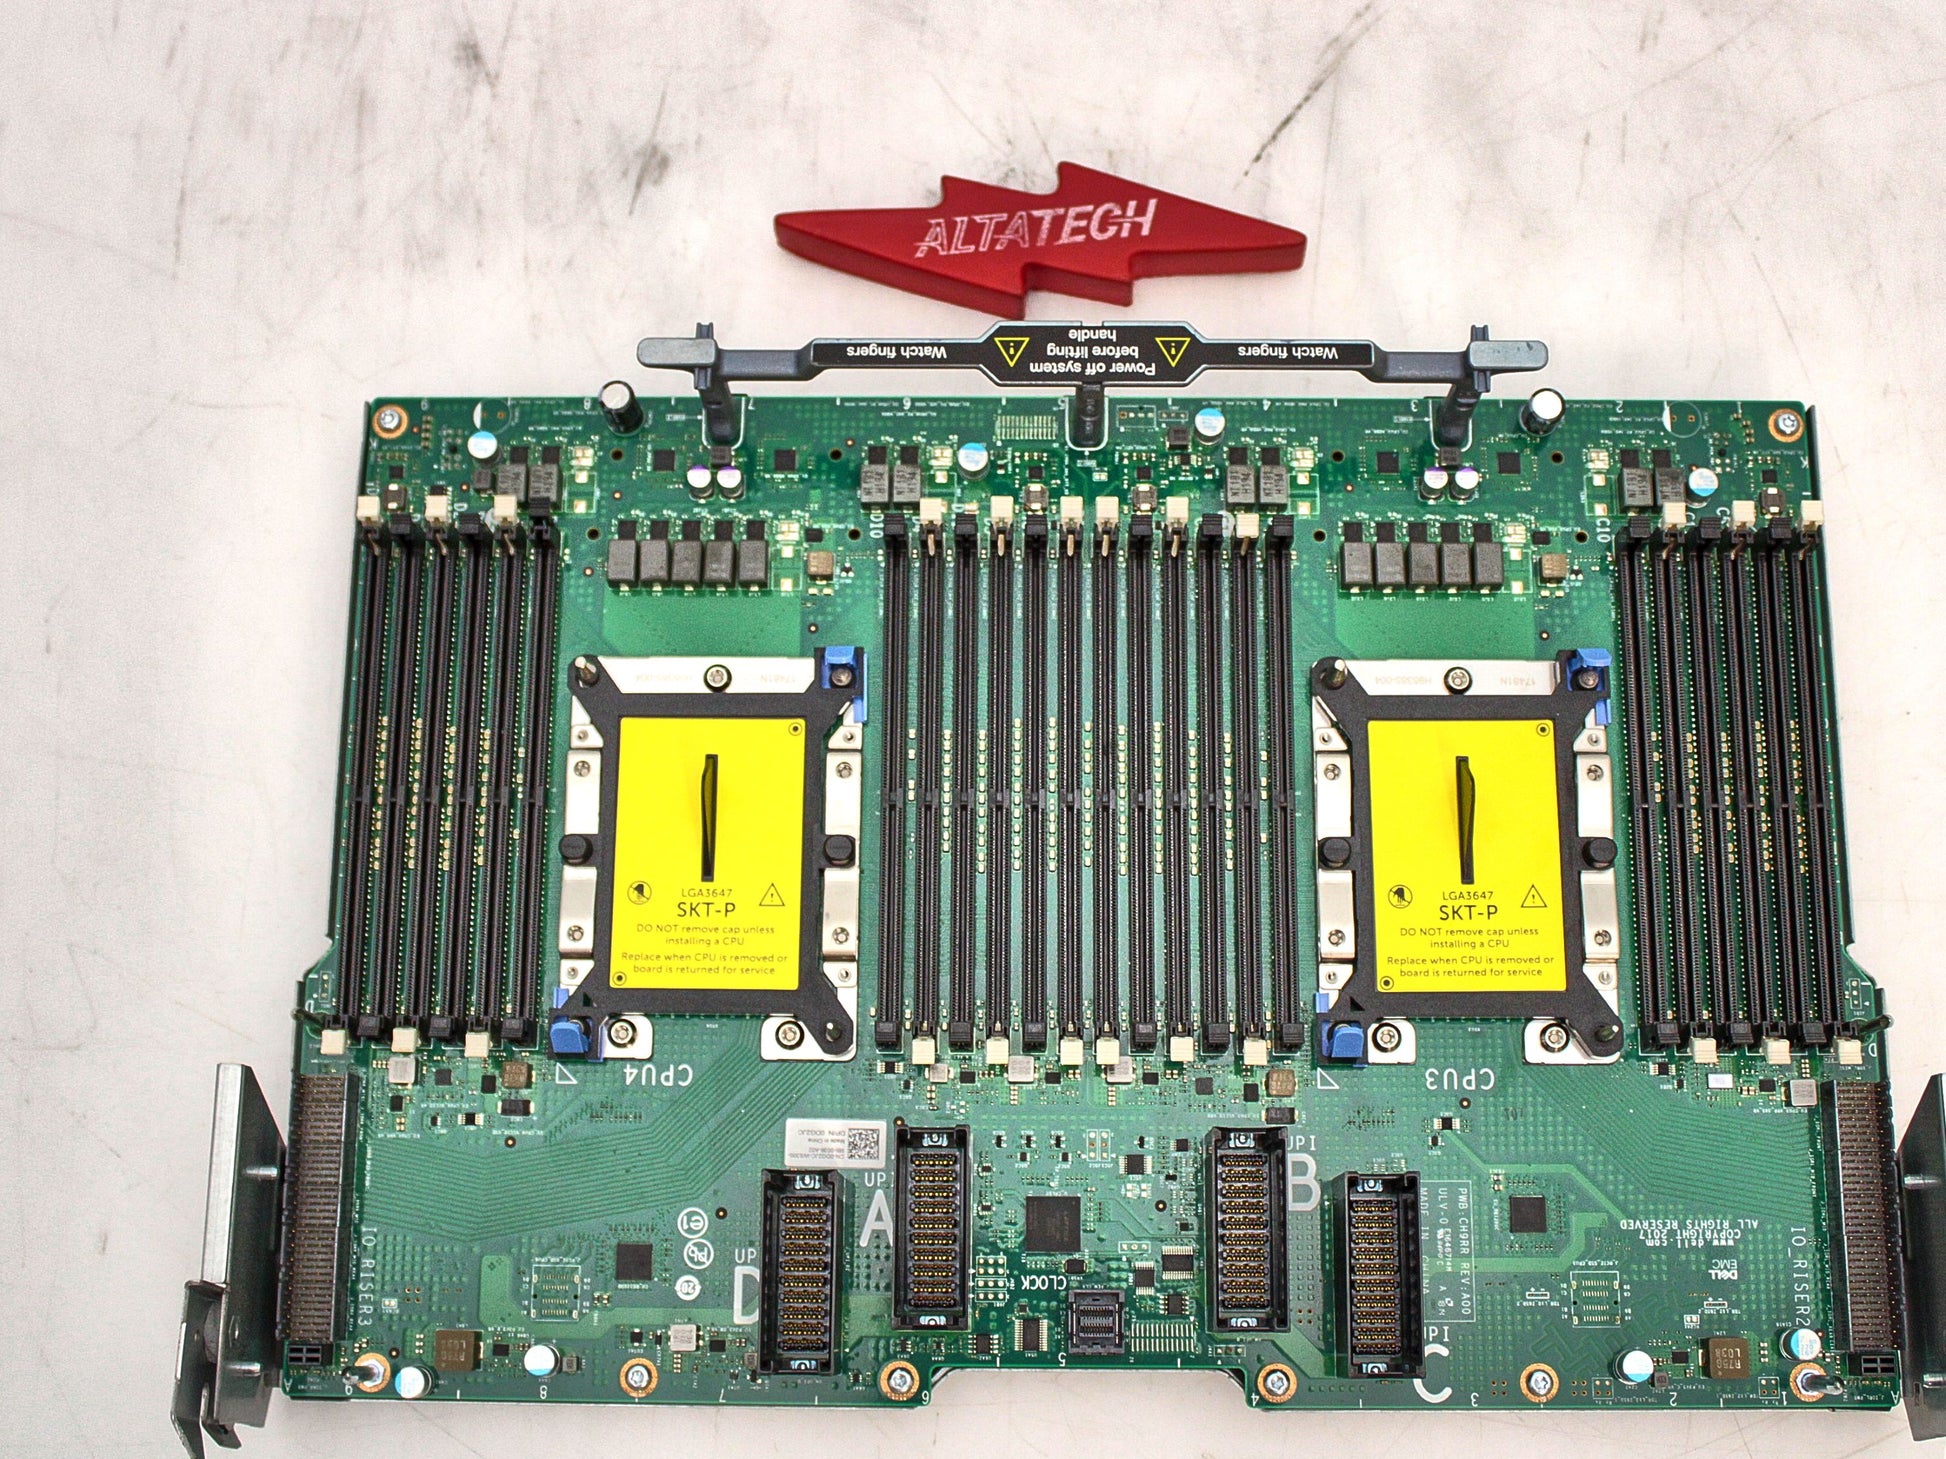 Dell DG2JC Expansion Board CPU #3 & #4 R940, Used